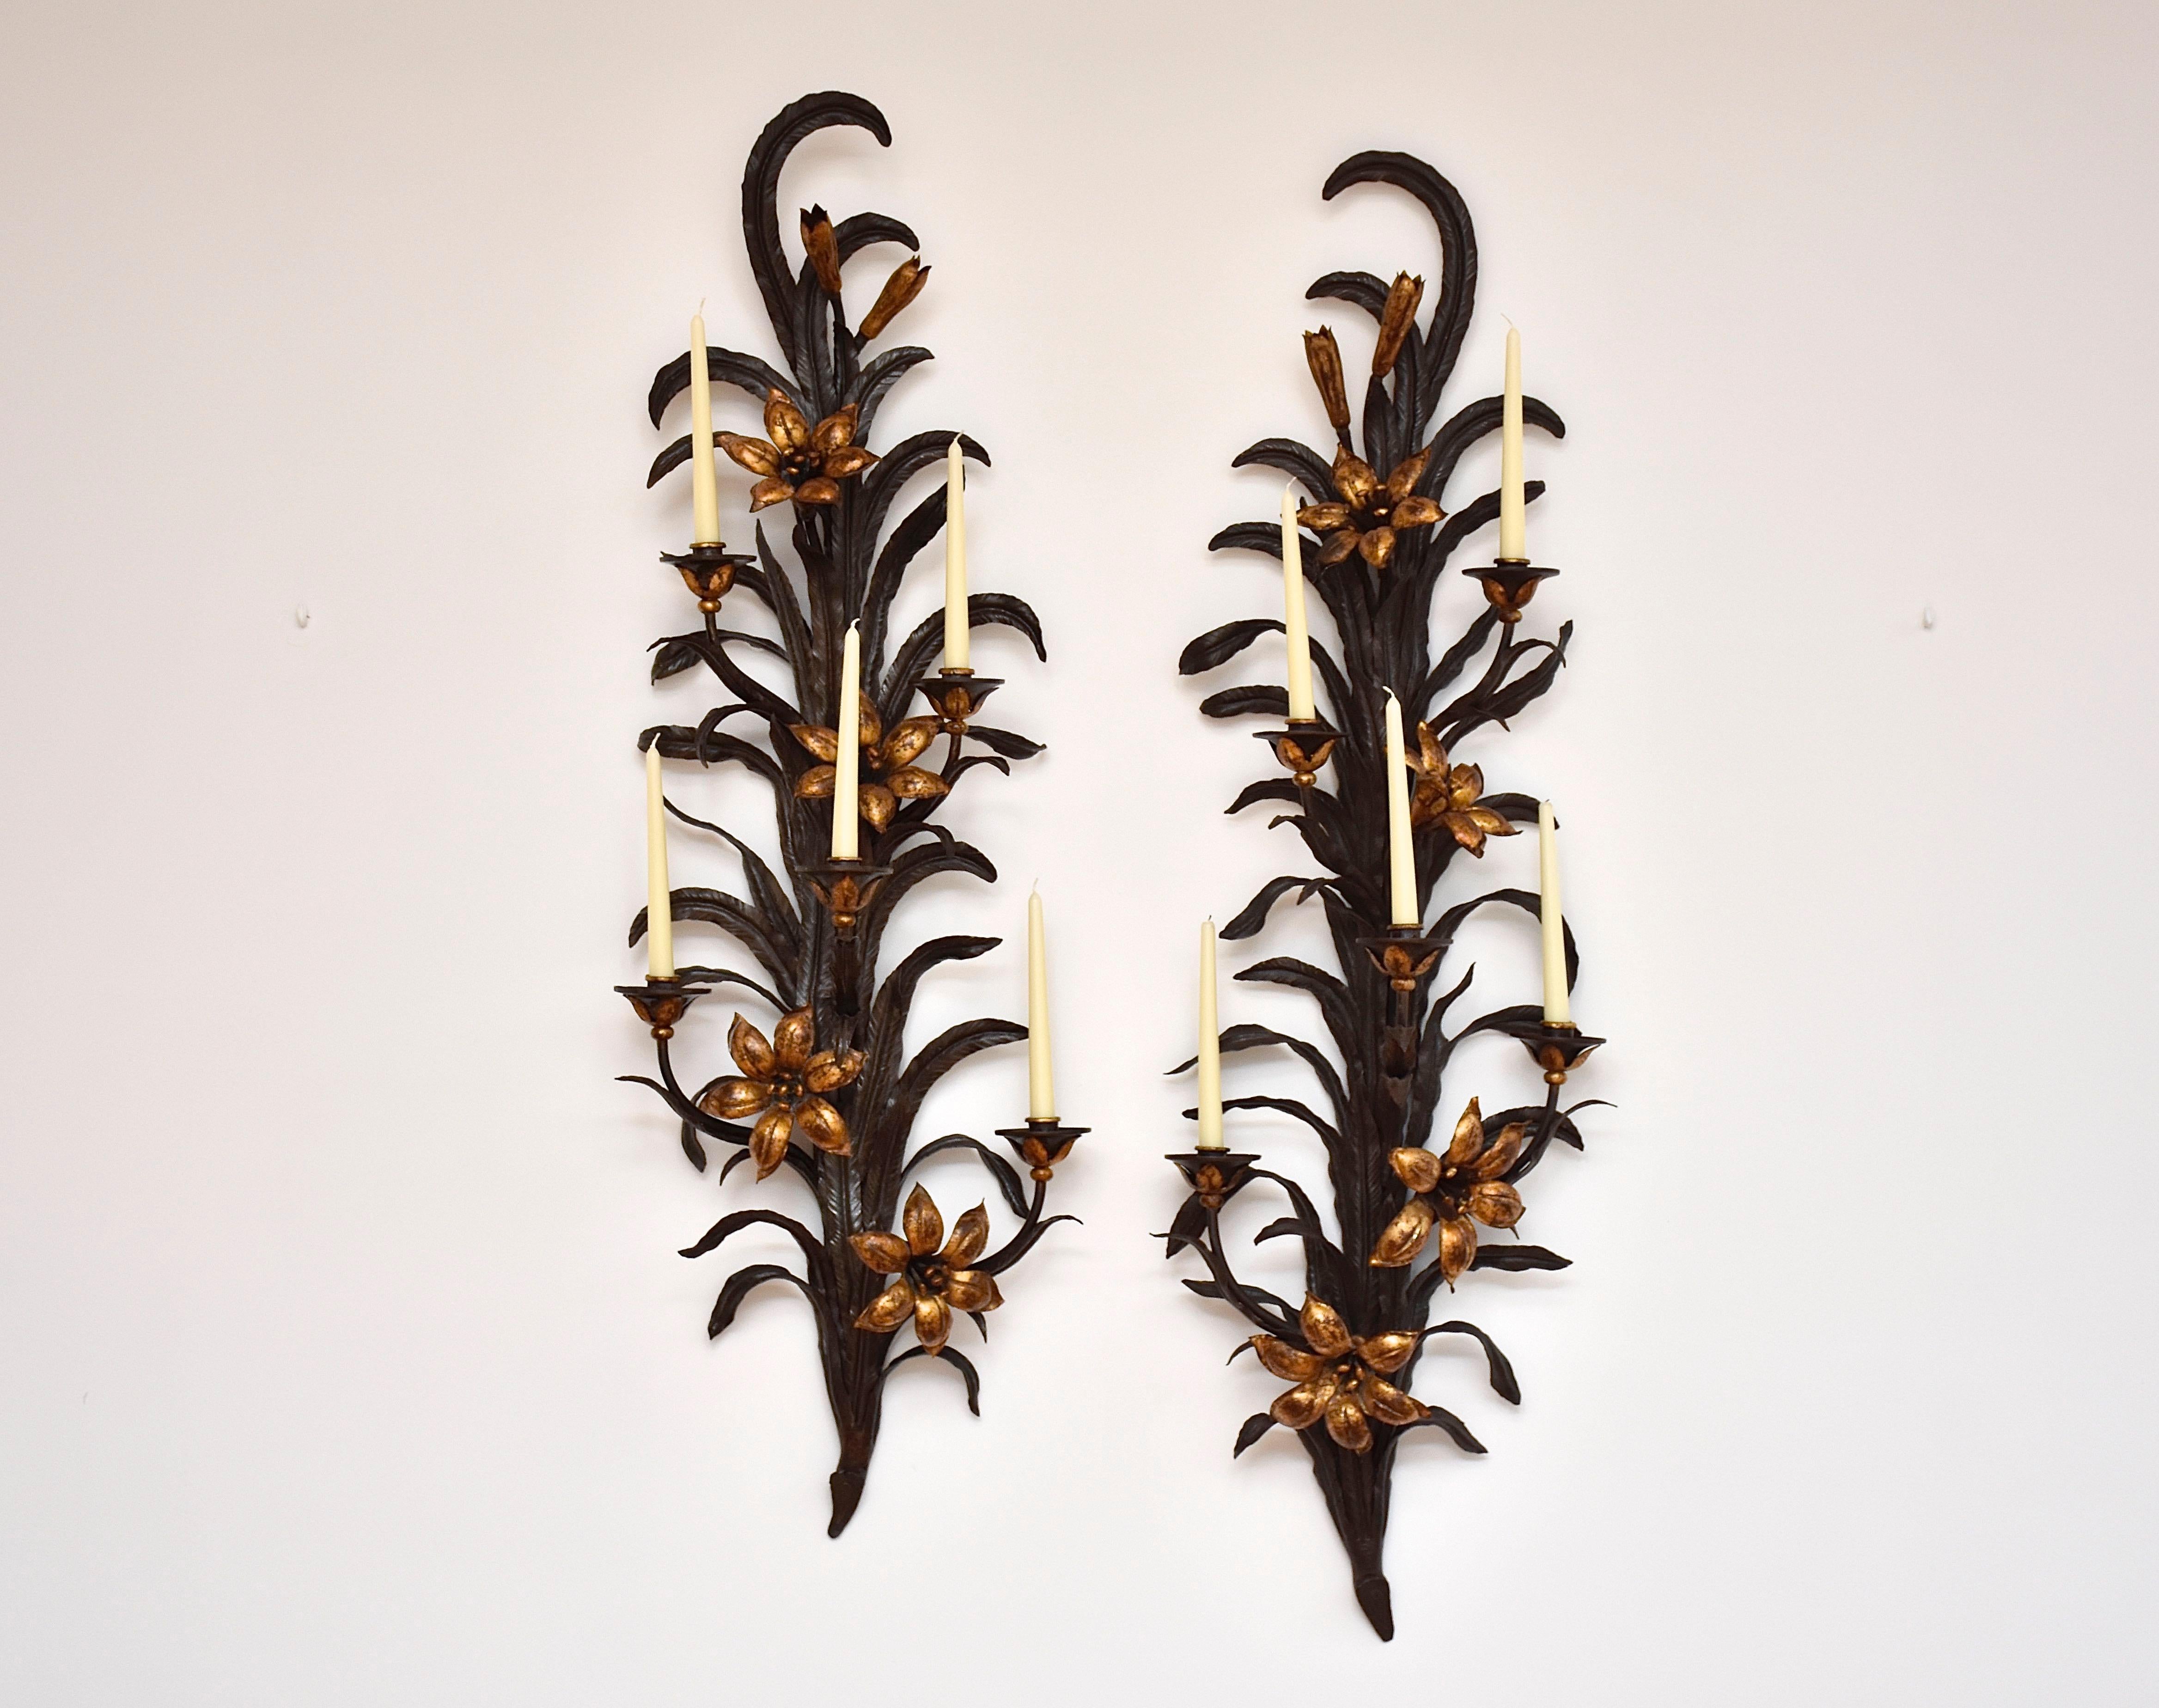 A very impressive and large pair of antique wall sconces, each with 5 candle arms.
Decorated with patinated foliage and gilt lily flowers.
Place of origin- France (private collection chateau)
Periode- late 19th, begin 20th century

The wall lights